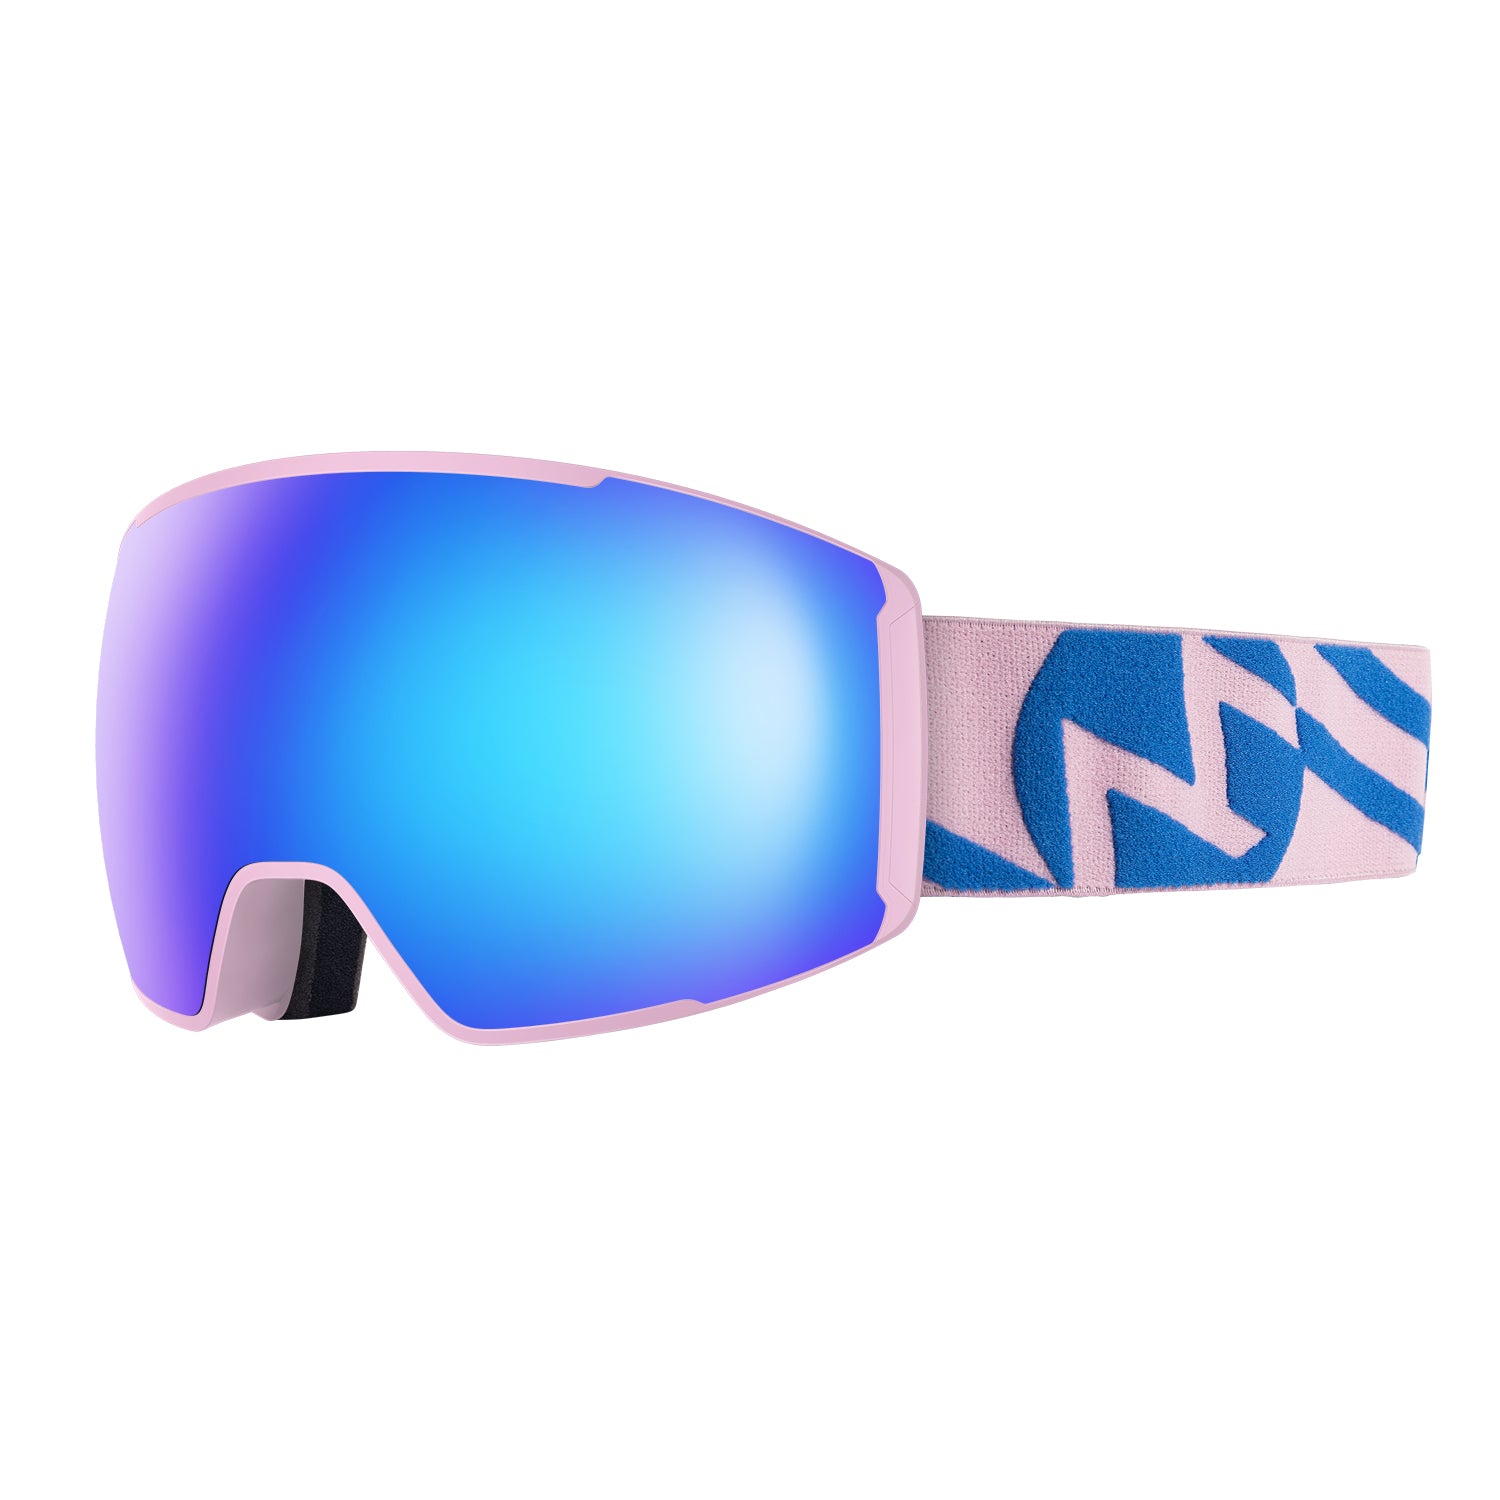 polarized goggles for skiing